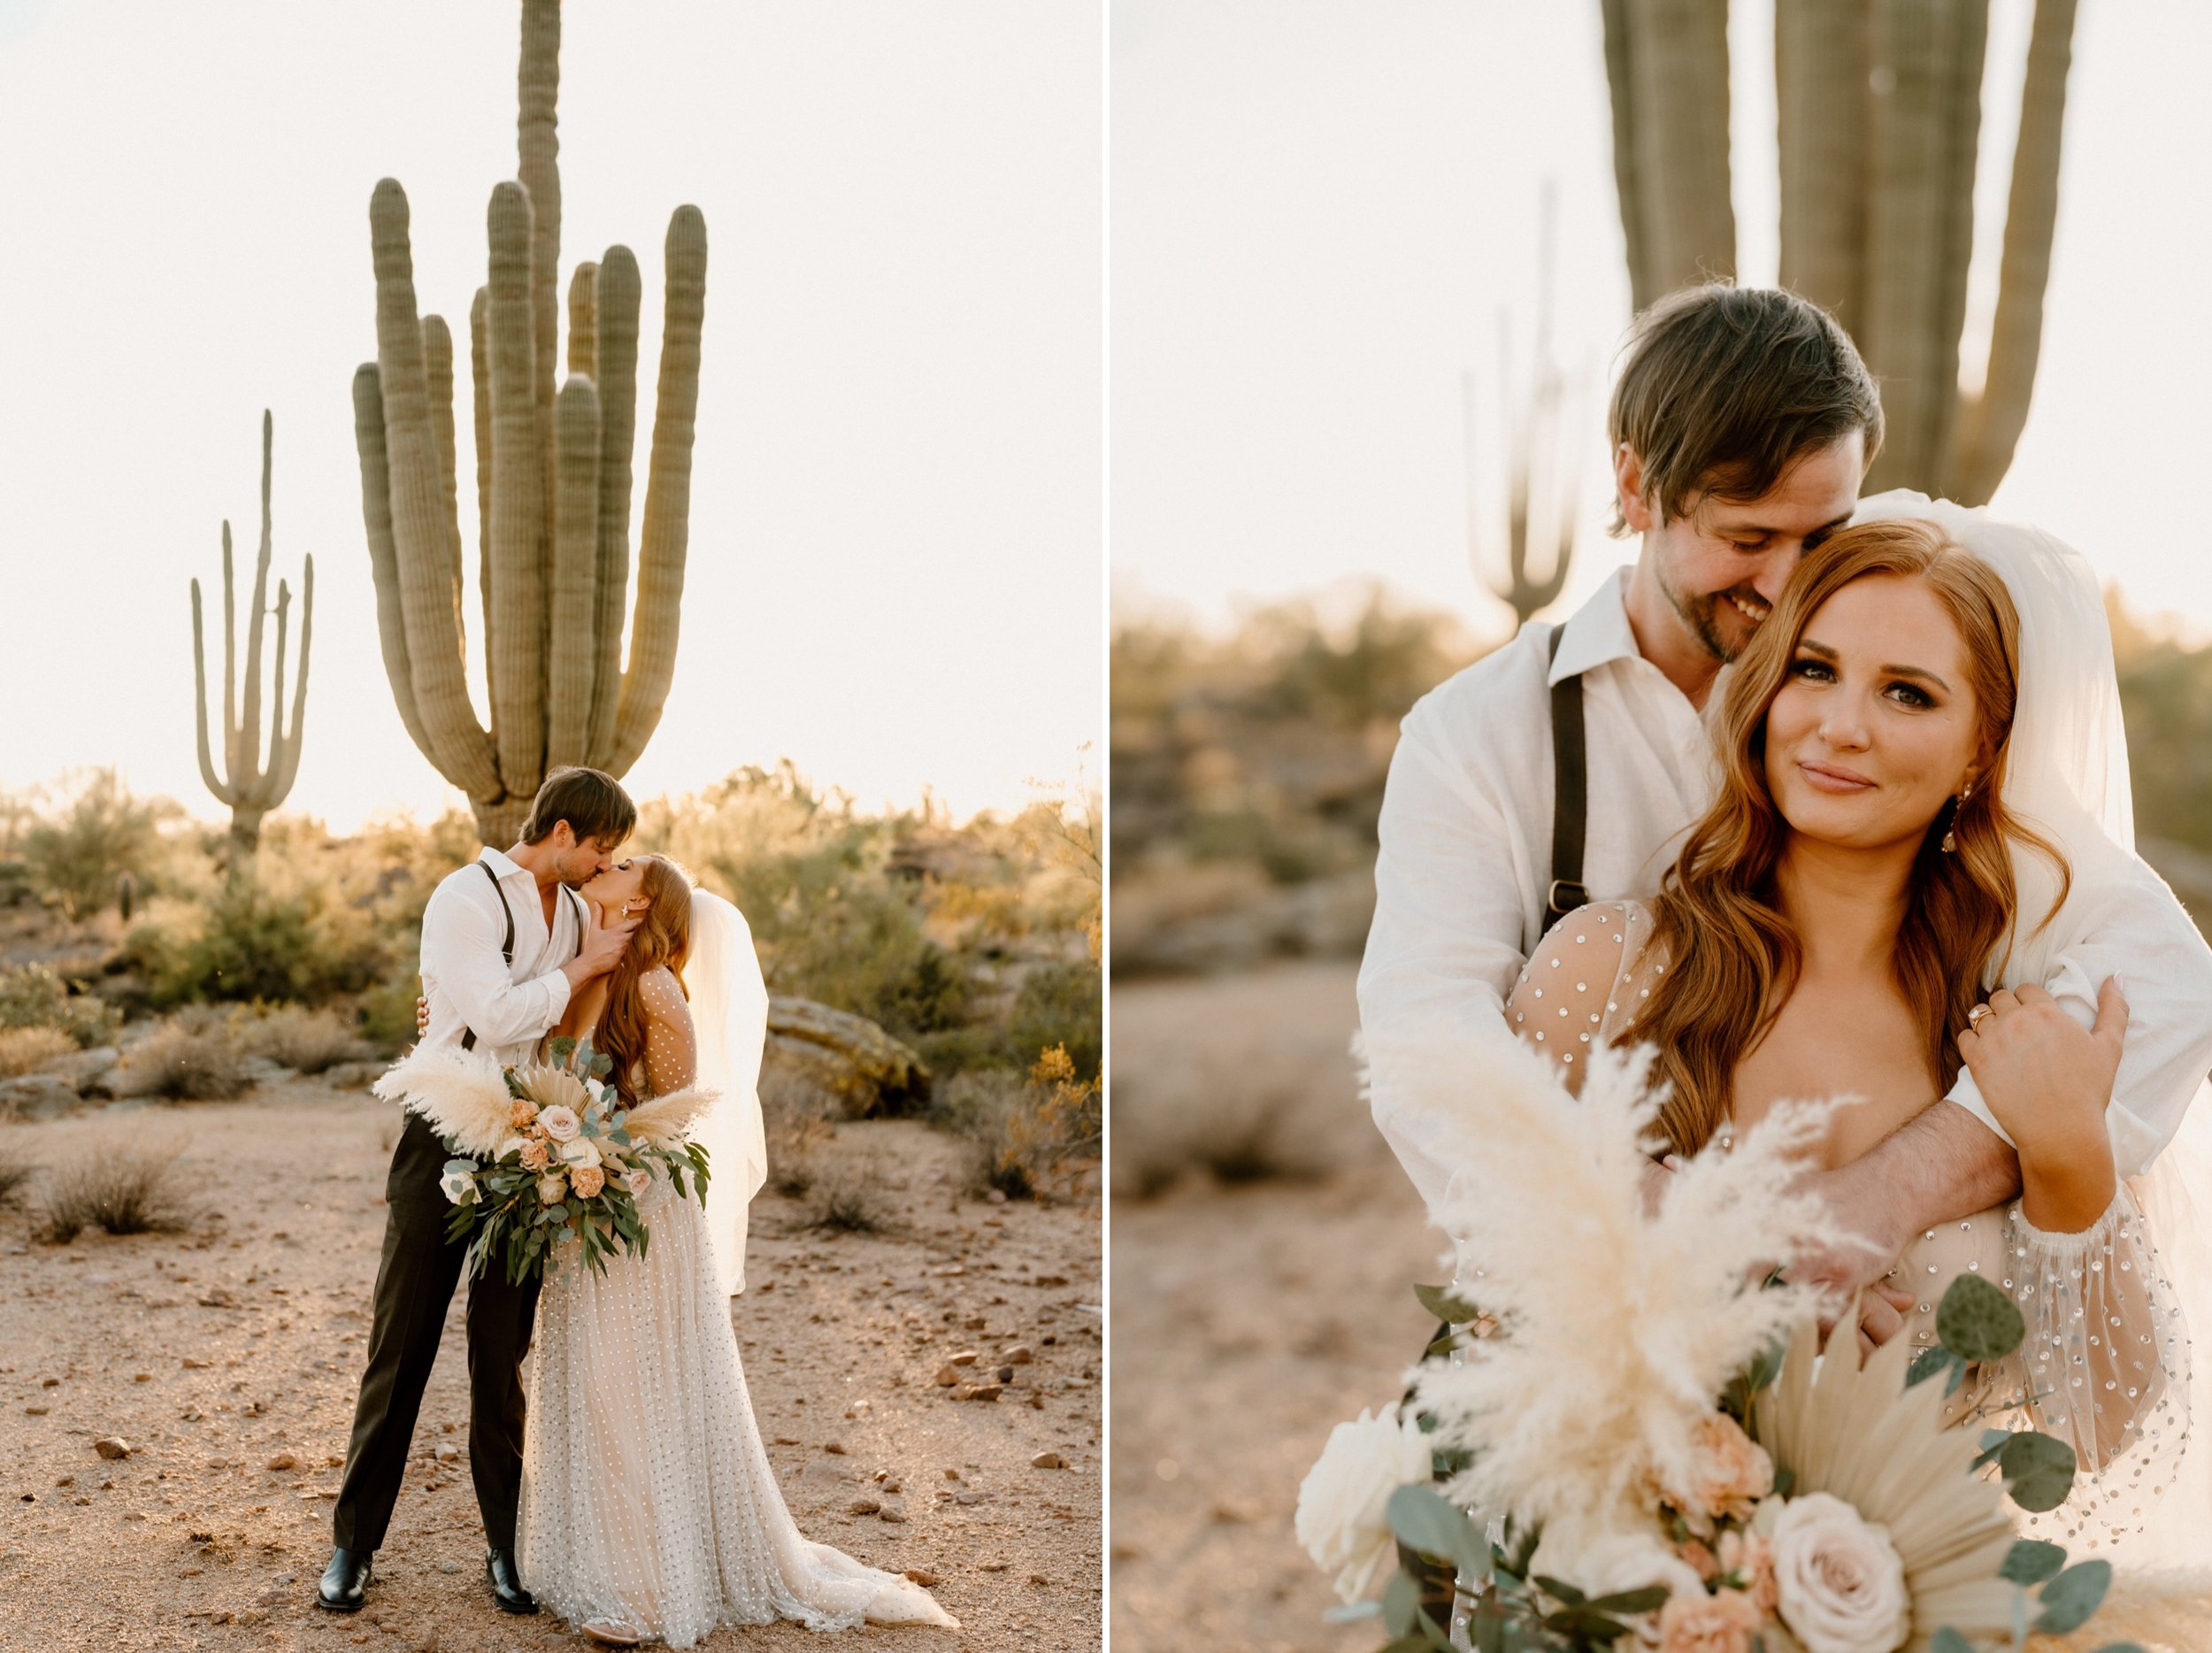 031_Wedding at The Paseo venue in Apache Junction, Arizona only 45 minutes from Phoenix..jpg